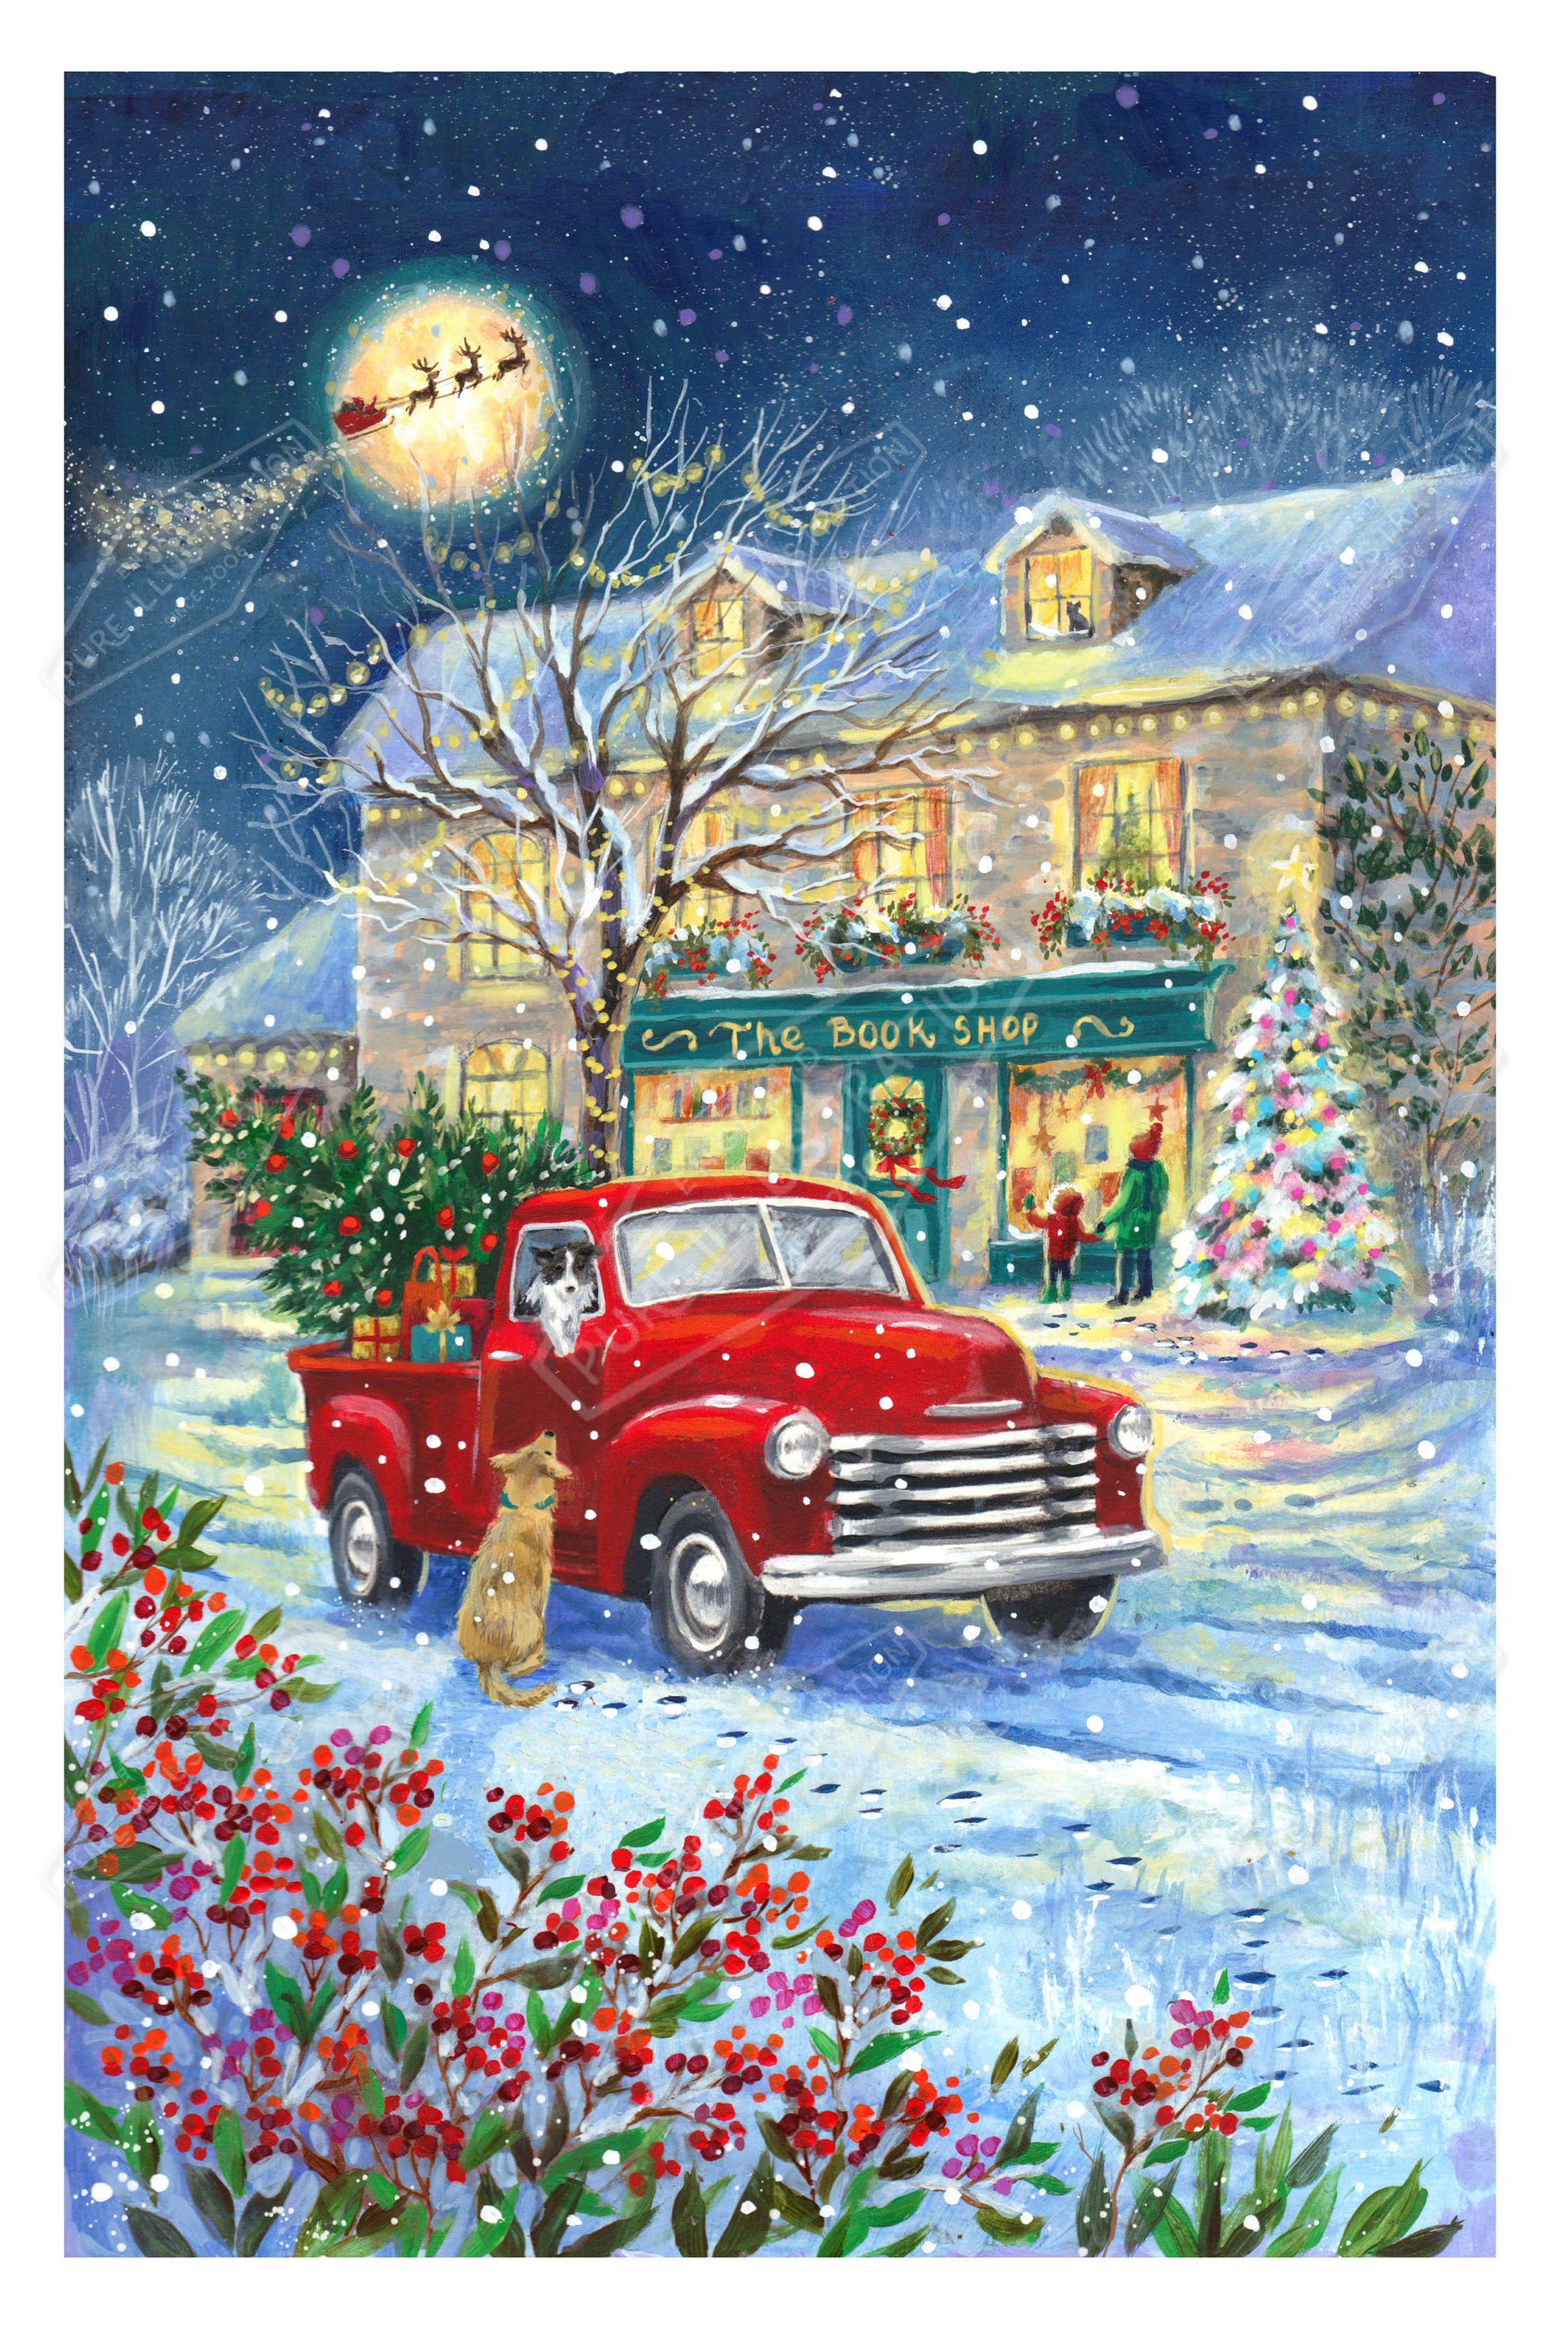 00035712AMA - Ally Marie is represented by Pure Art Licensing Agency - Christmas Greeting Card Design